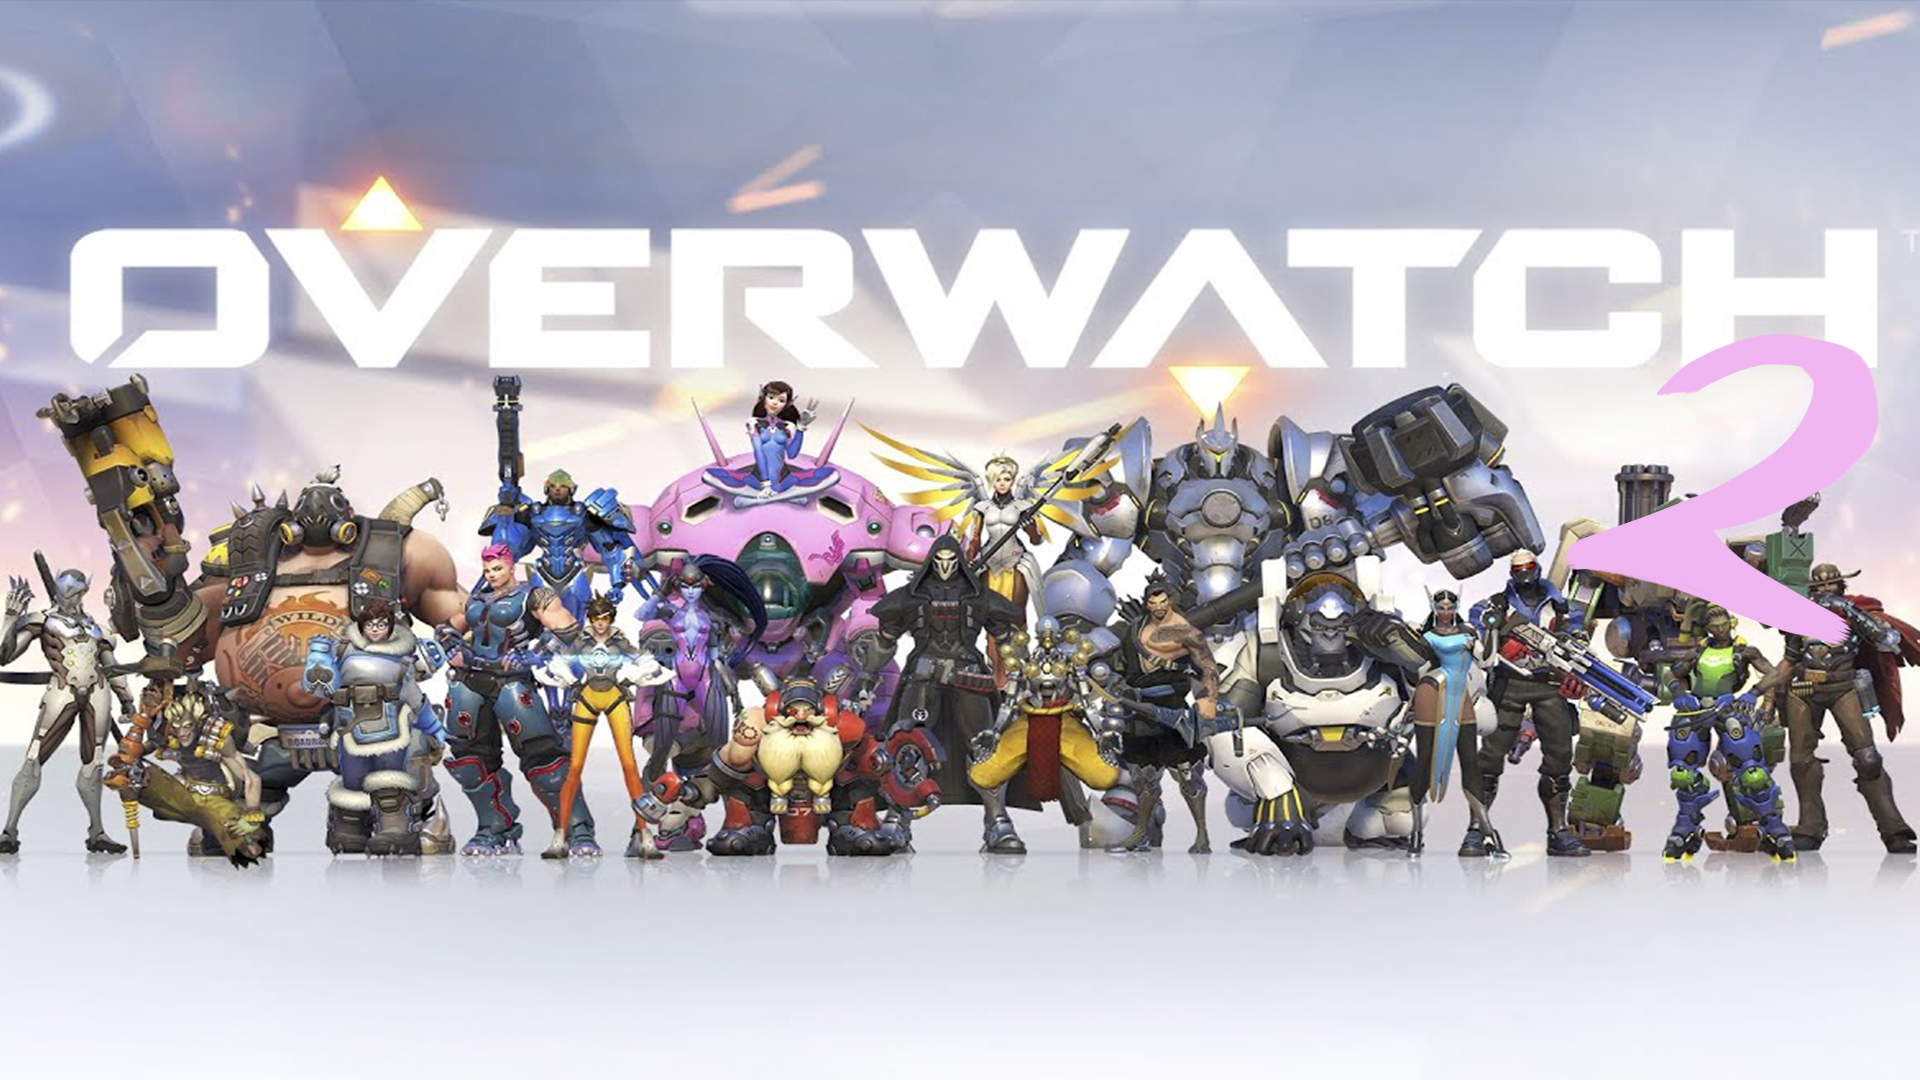 Overwatch Update Version 2.70 Full New Patch Notes Xbox One PS4 PC Full Details Here 2019